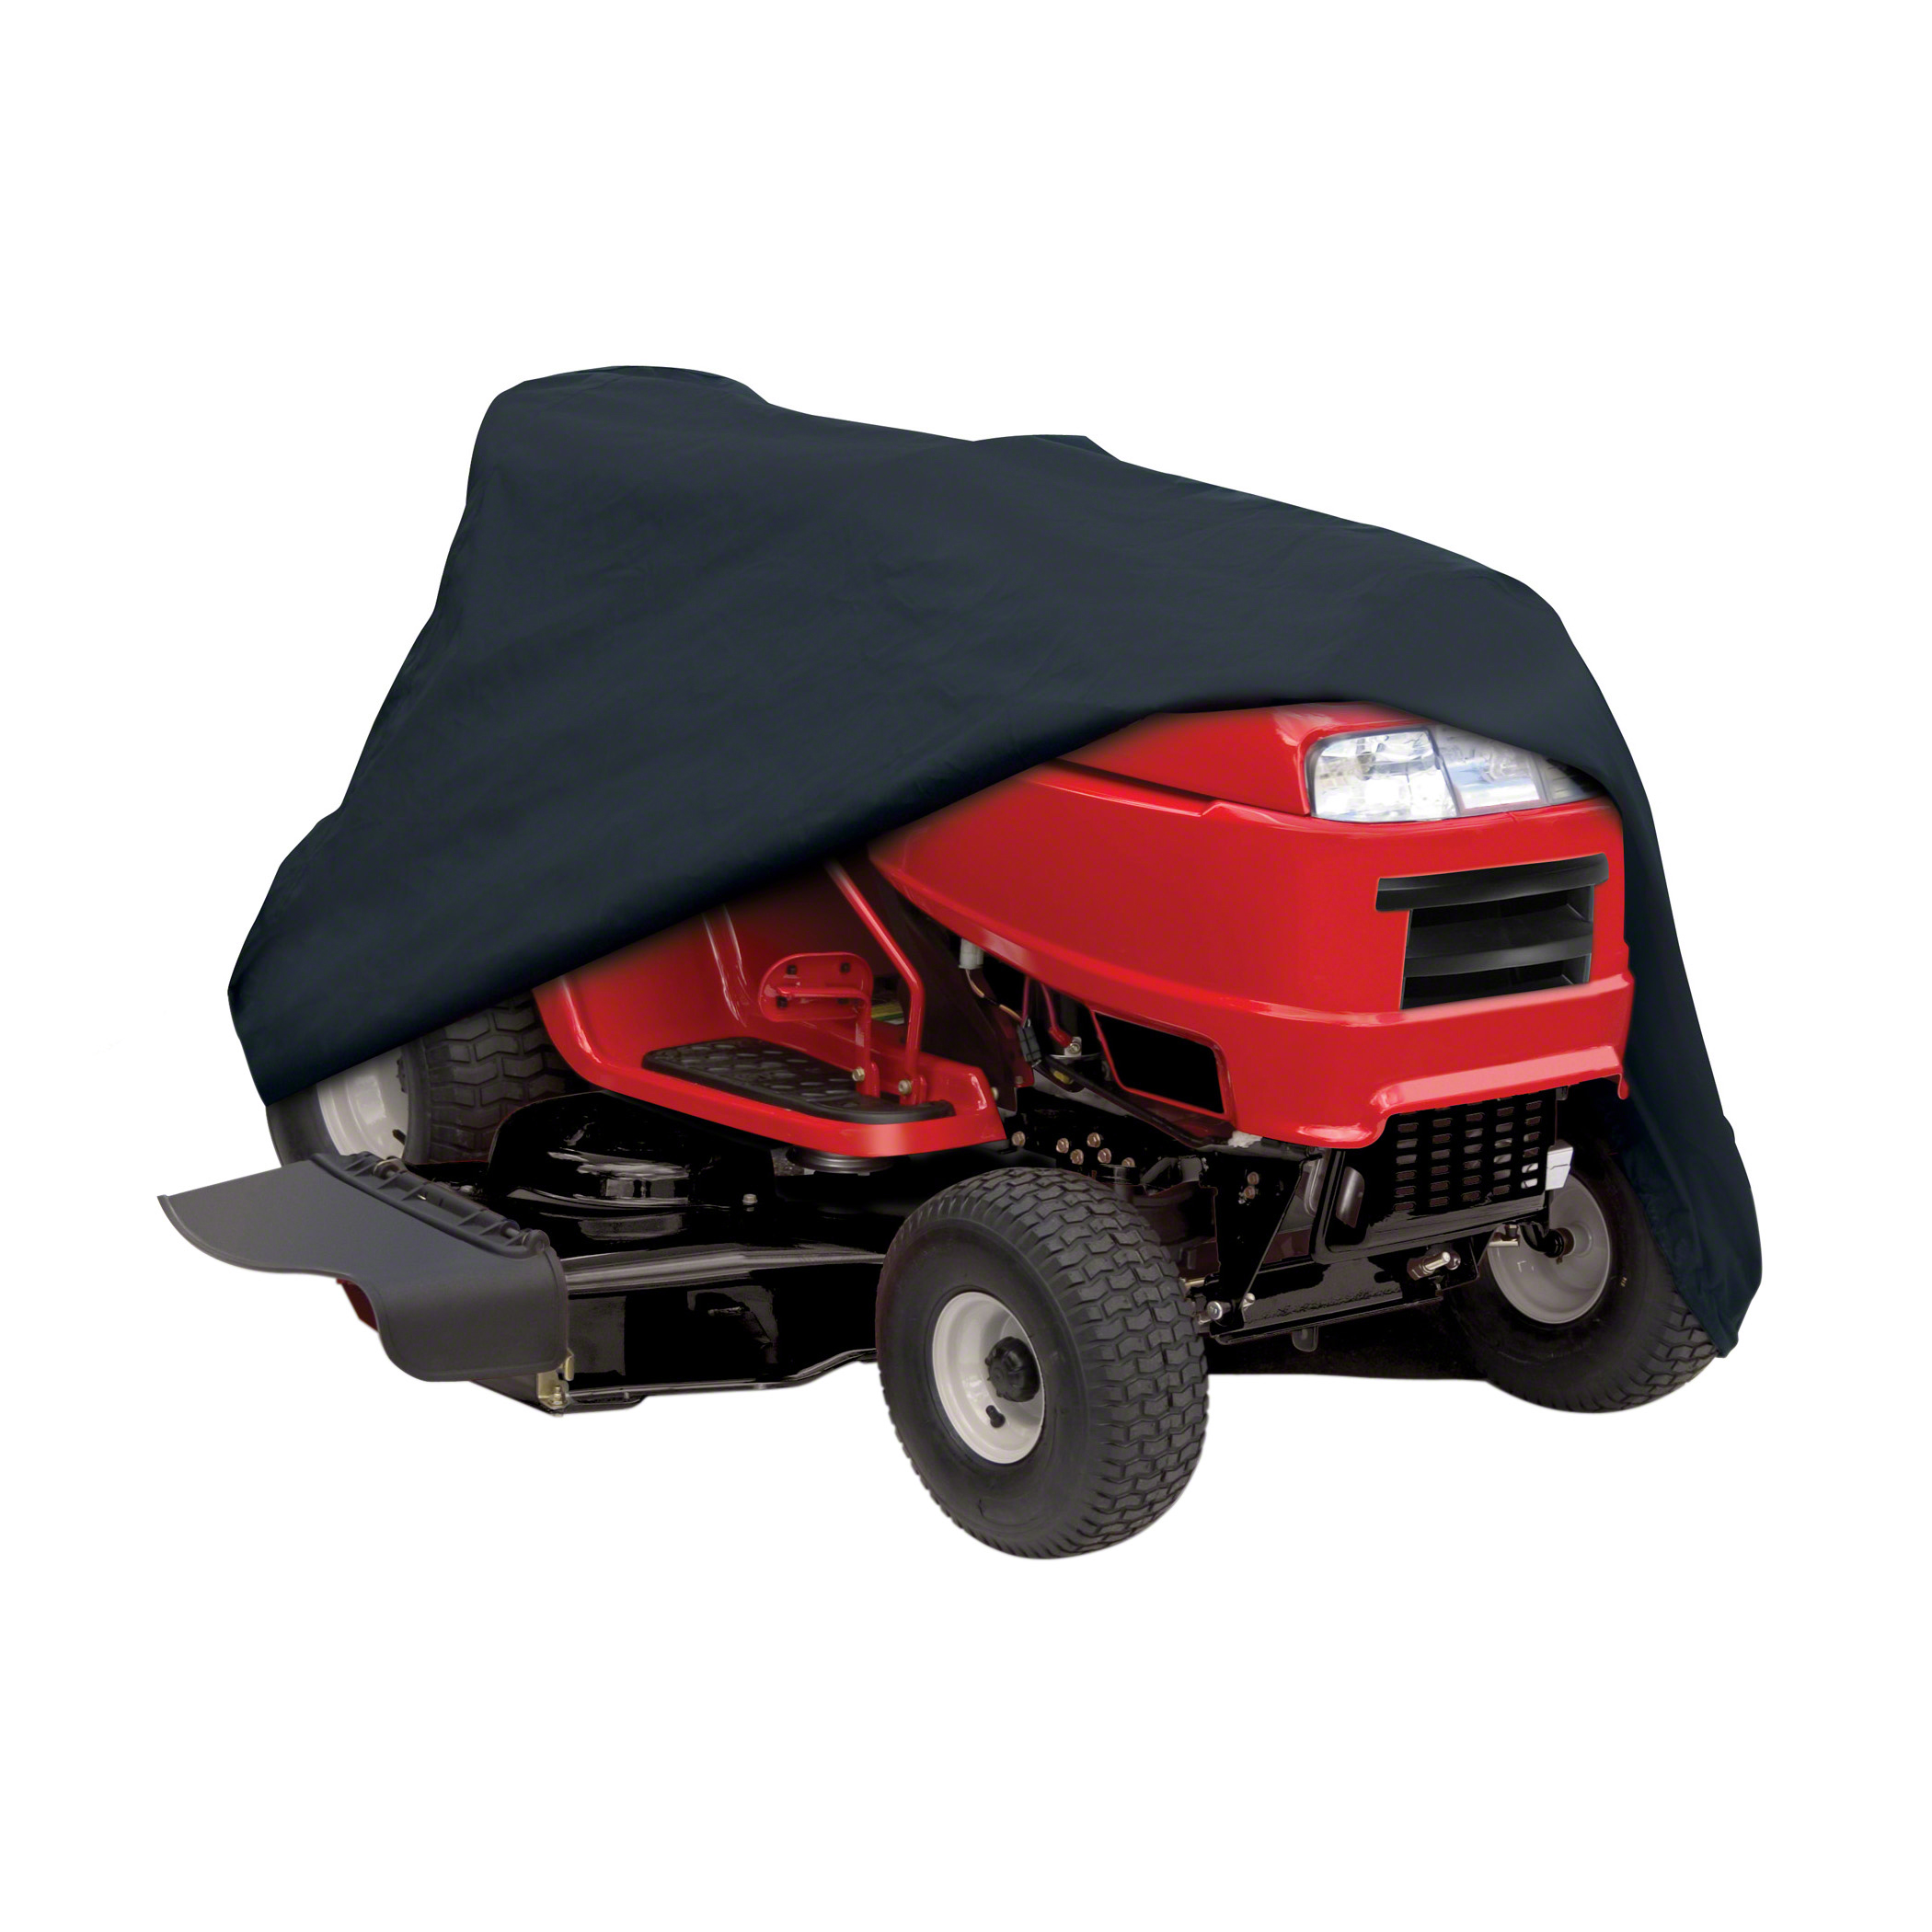 Classic Accessories Black Riding Lawn Mower Tractor Storage Cover, Fits Lawn Tractors with Decks 54"W - image 1 of 7